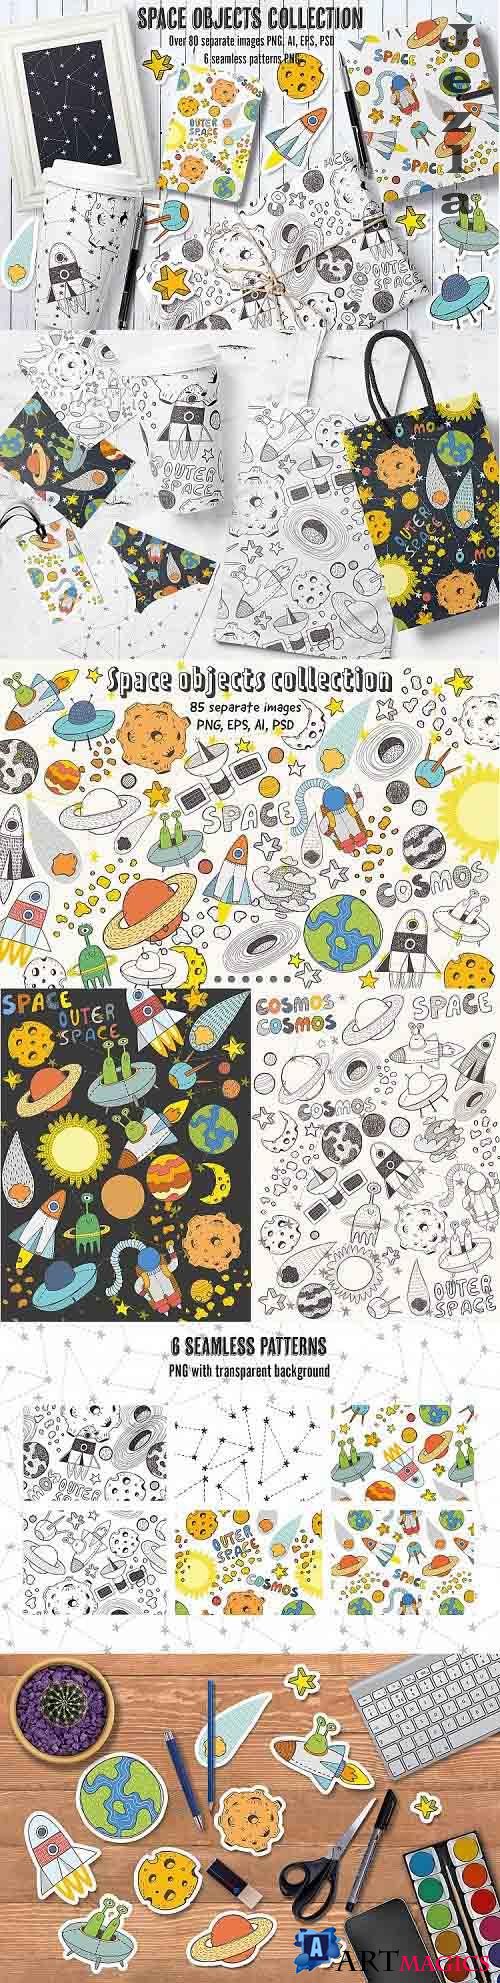 Space objects collection - 79308